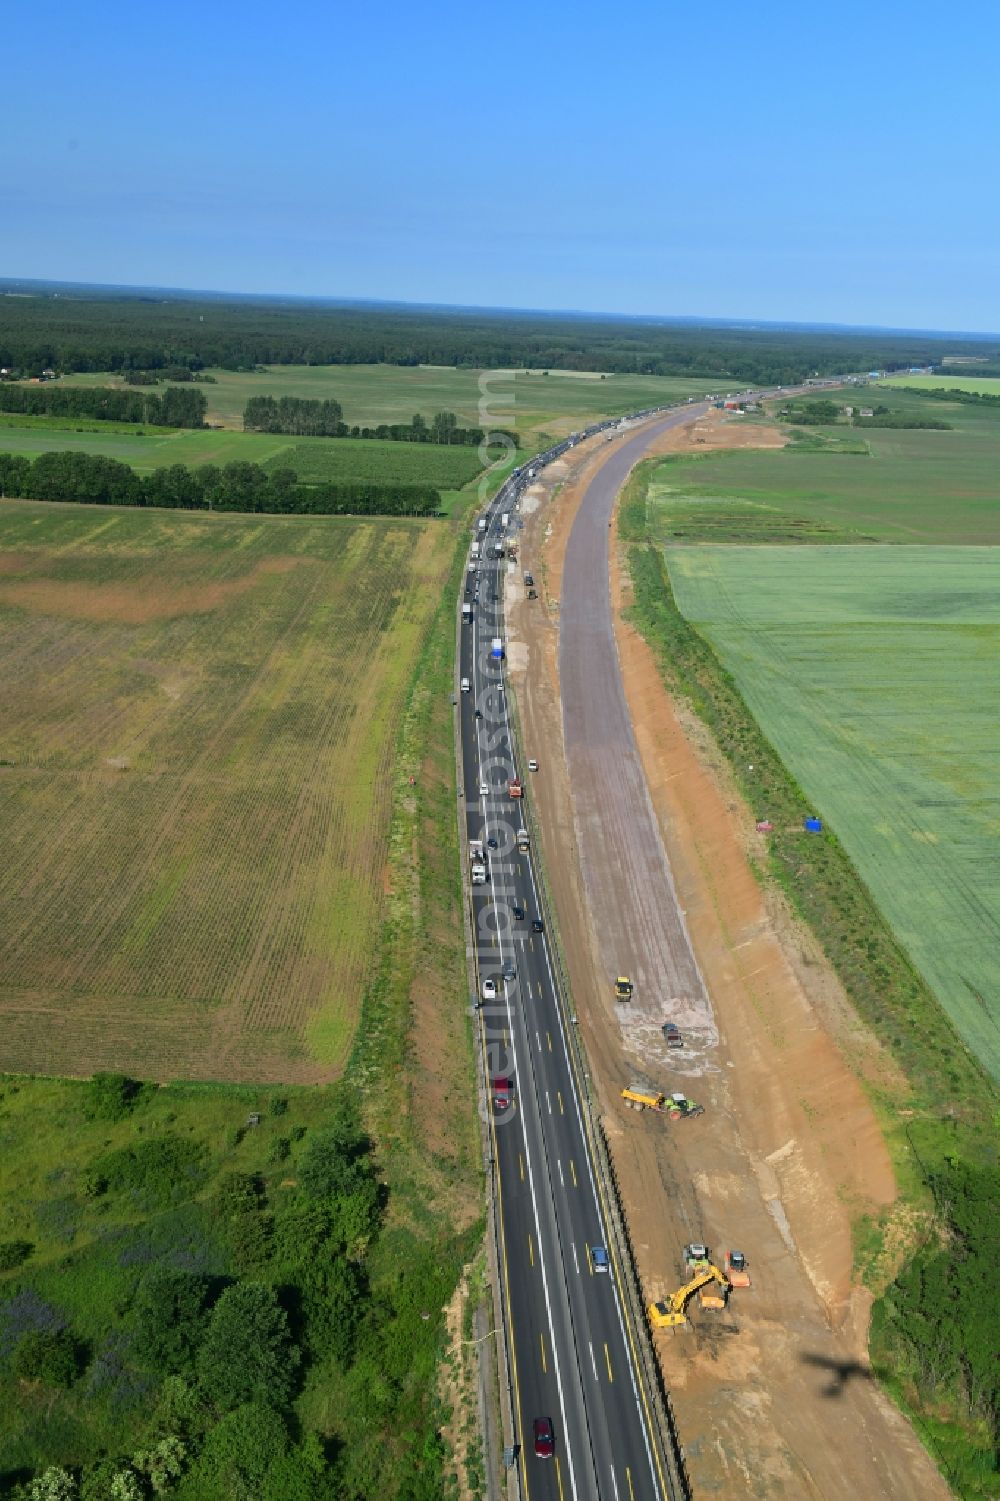 Oberkrämer from the bird's eye view: Highway construction site for the expansion and extension of track along the route of A10 in Oberkraemer in the state Brandenburg, Germany